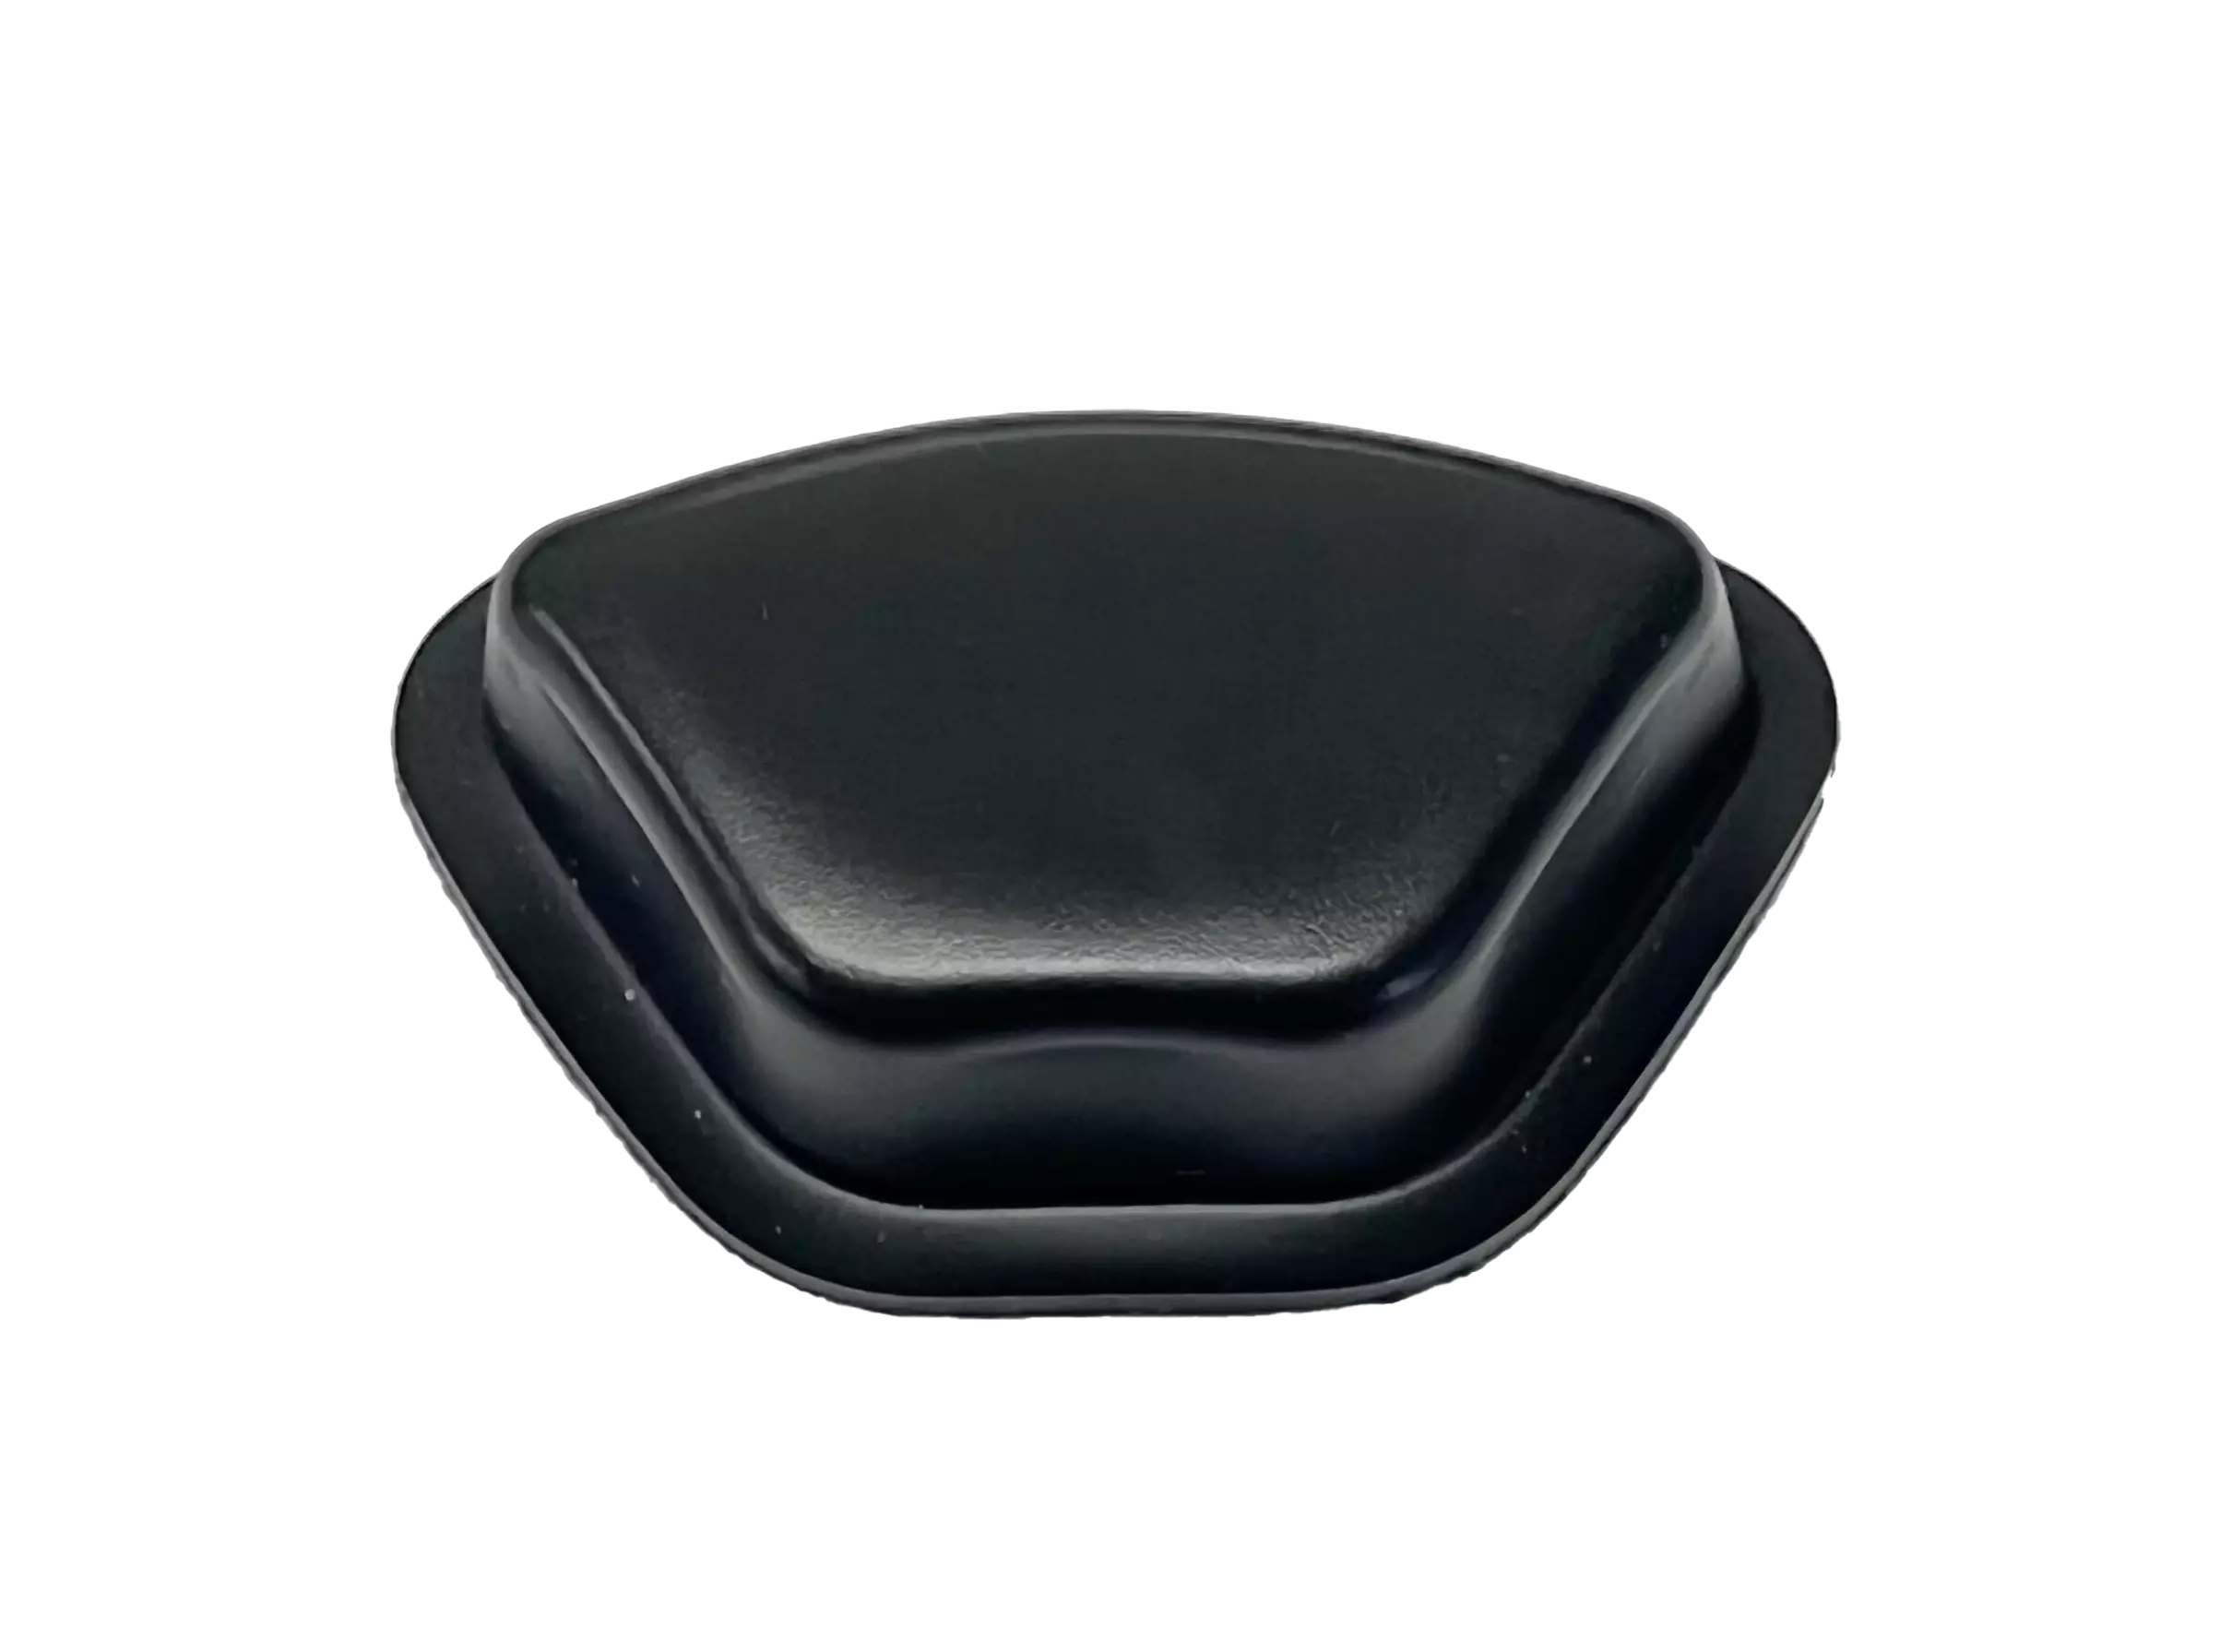 Top Side view of black Universal Jaw Pad.